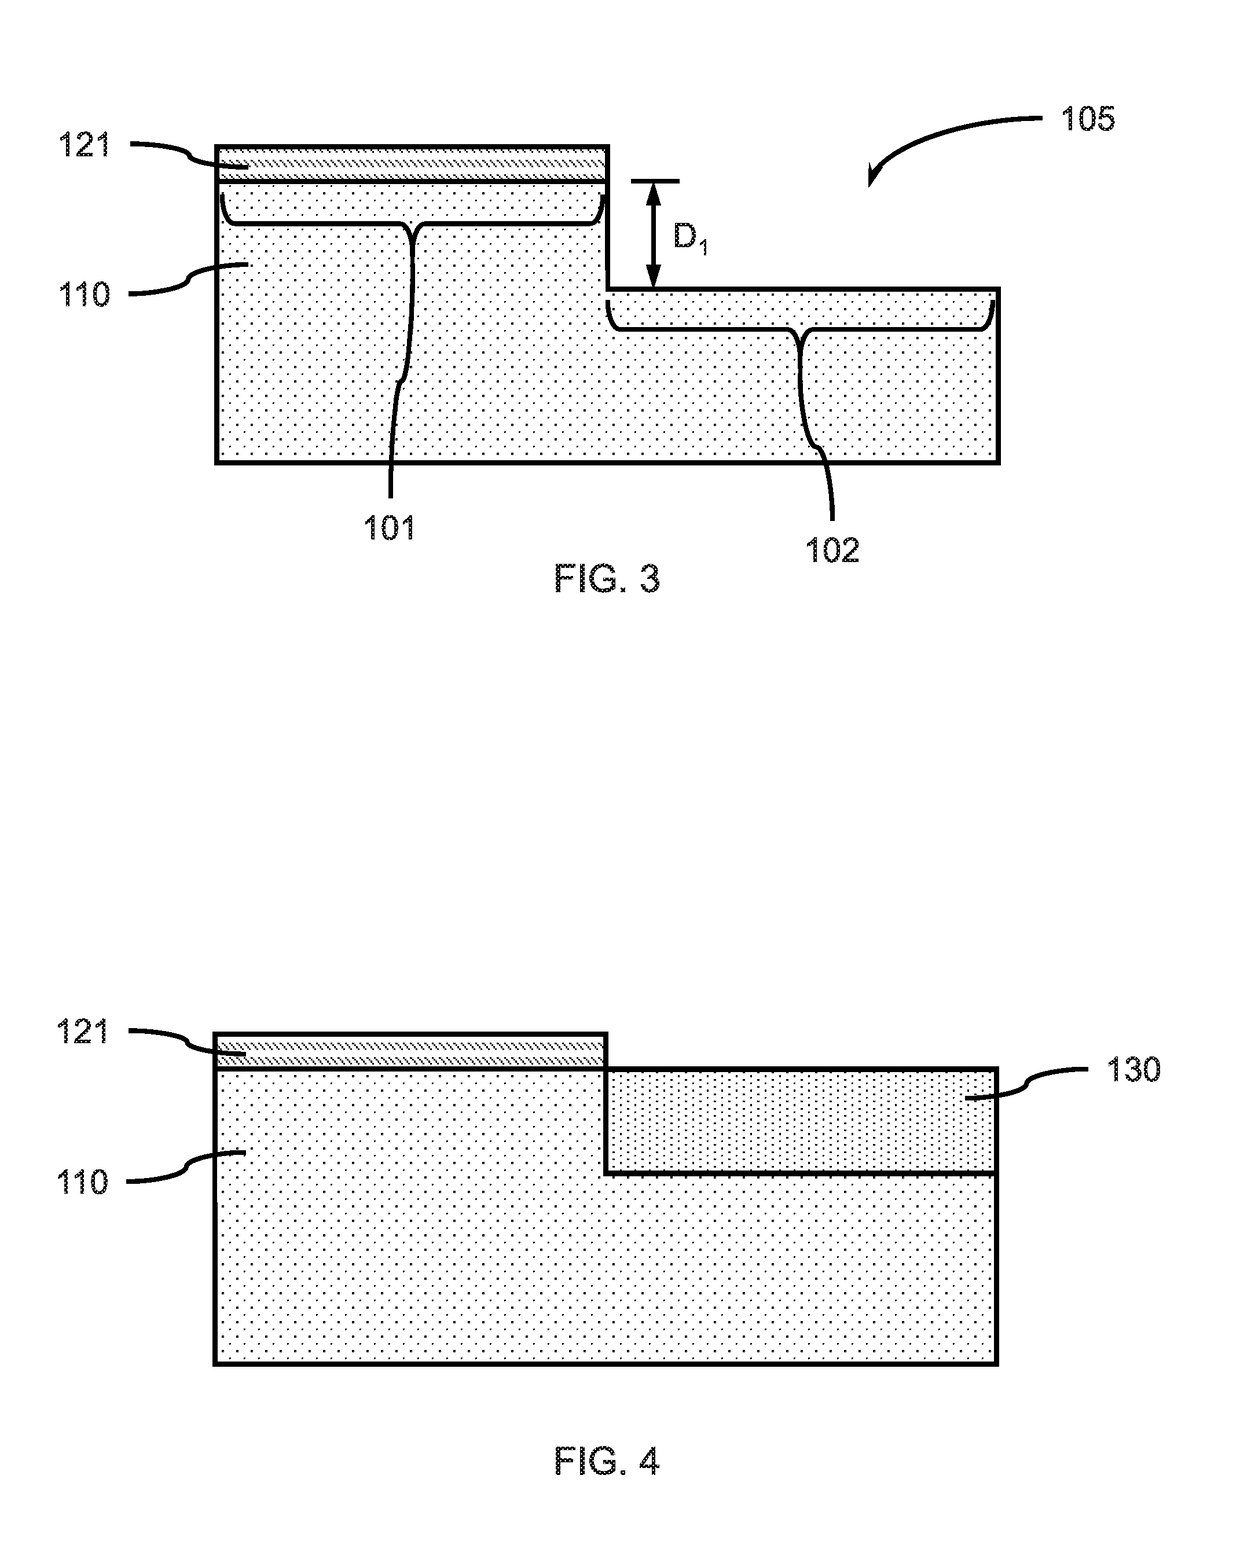 Fabrication of fin field effect transistors utilizing different fin channel materials while maintaining consistent fin widths